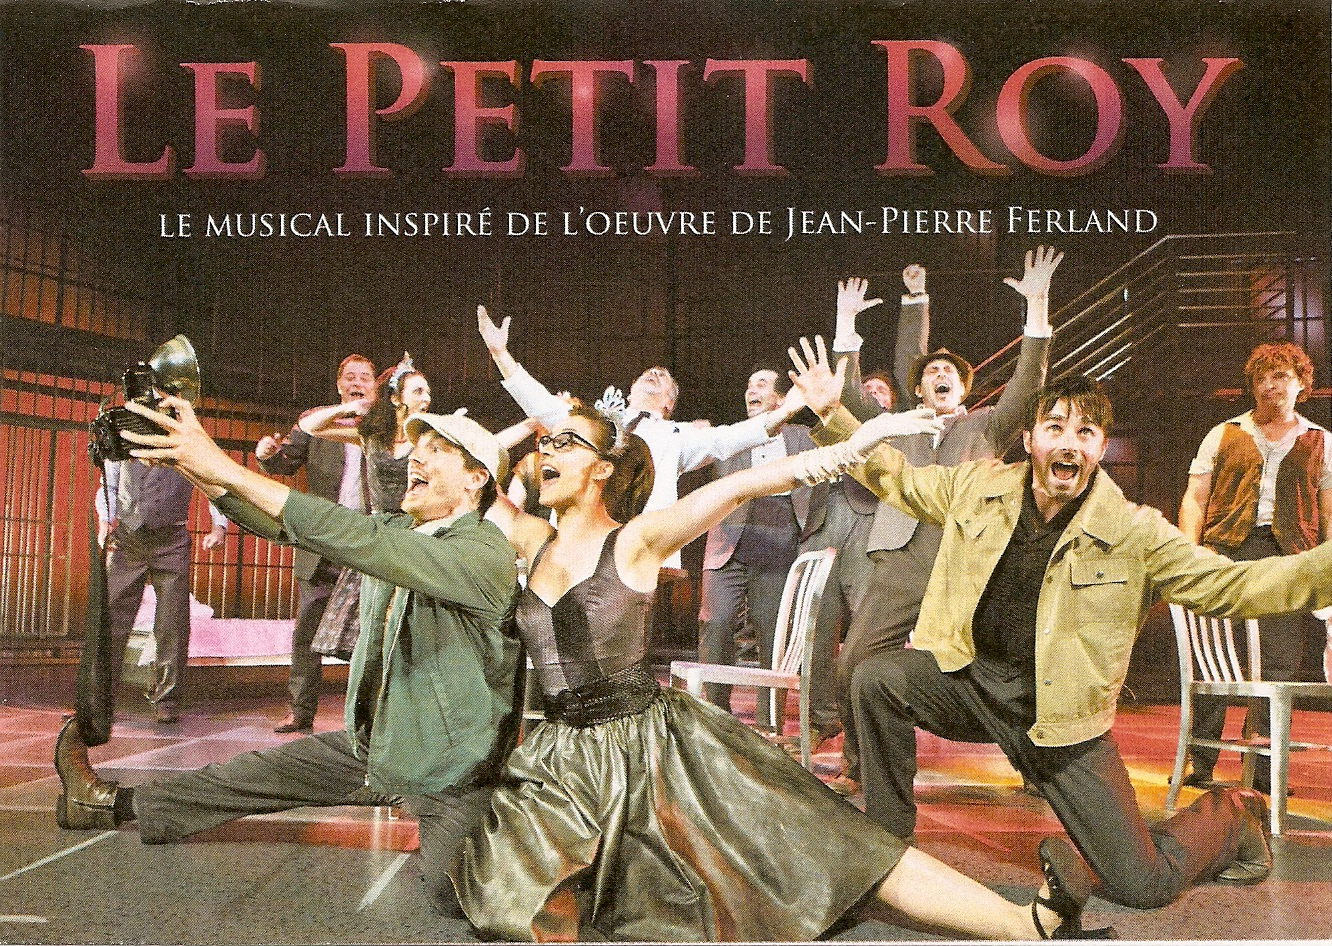 Le Petit Roy-Musical Music and Lyrics by Jean-Pierre Ferland Book by Robert Marien and Benoit L'Herbier Directed by Serge Postigo Produced by Juste Pour Rire